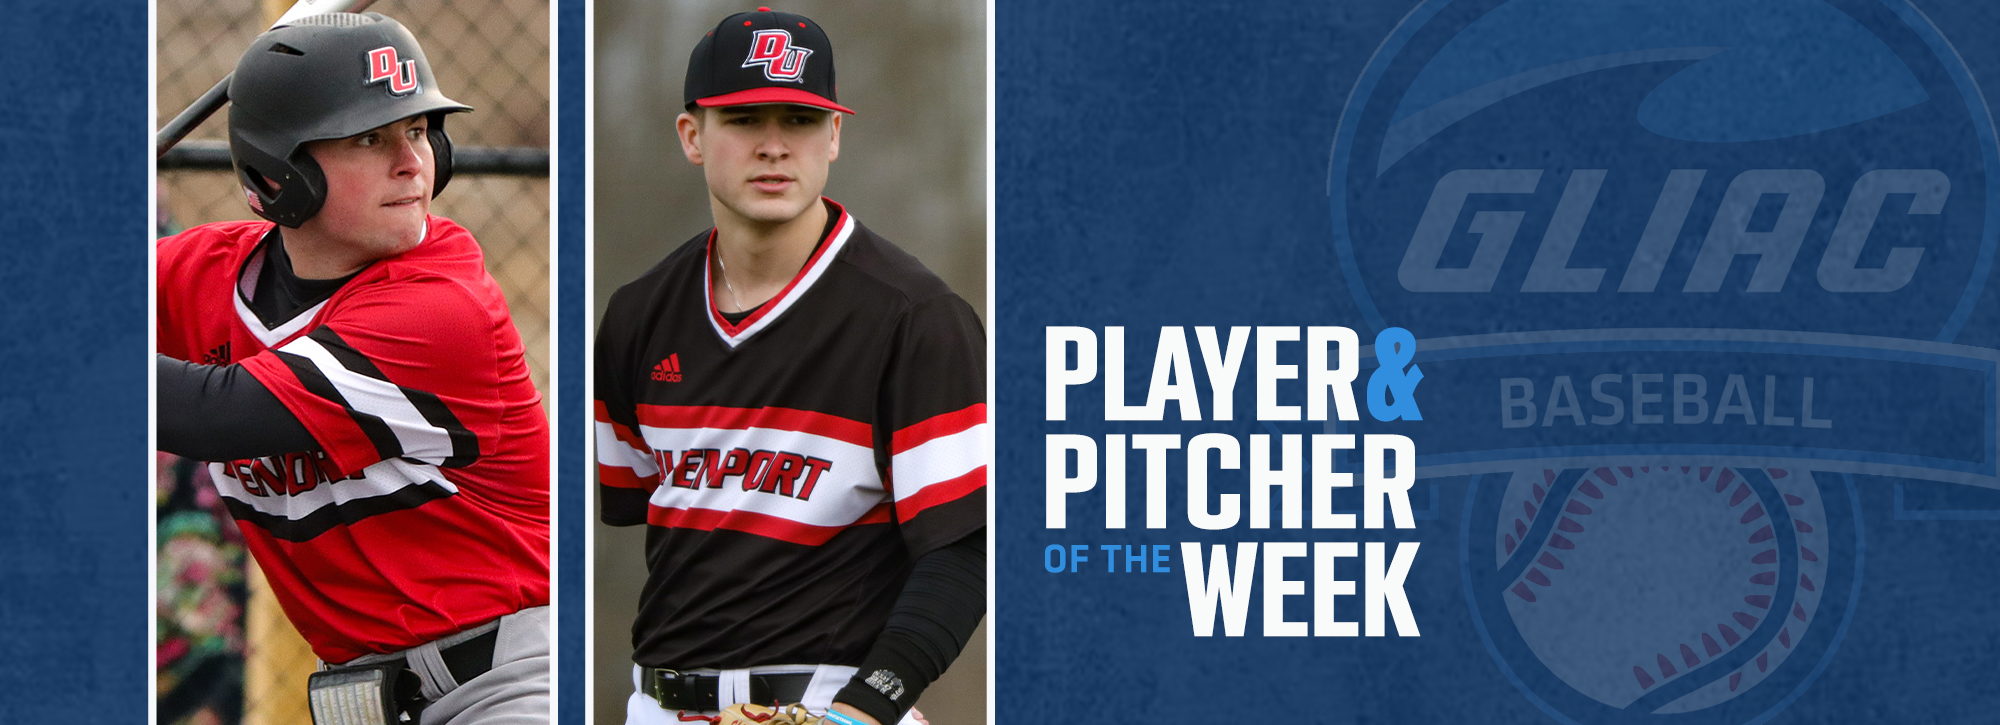 DU's Showers and Fischer claim weekly baseball honors